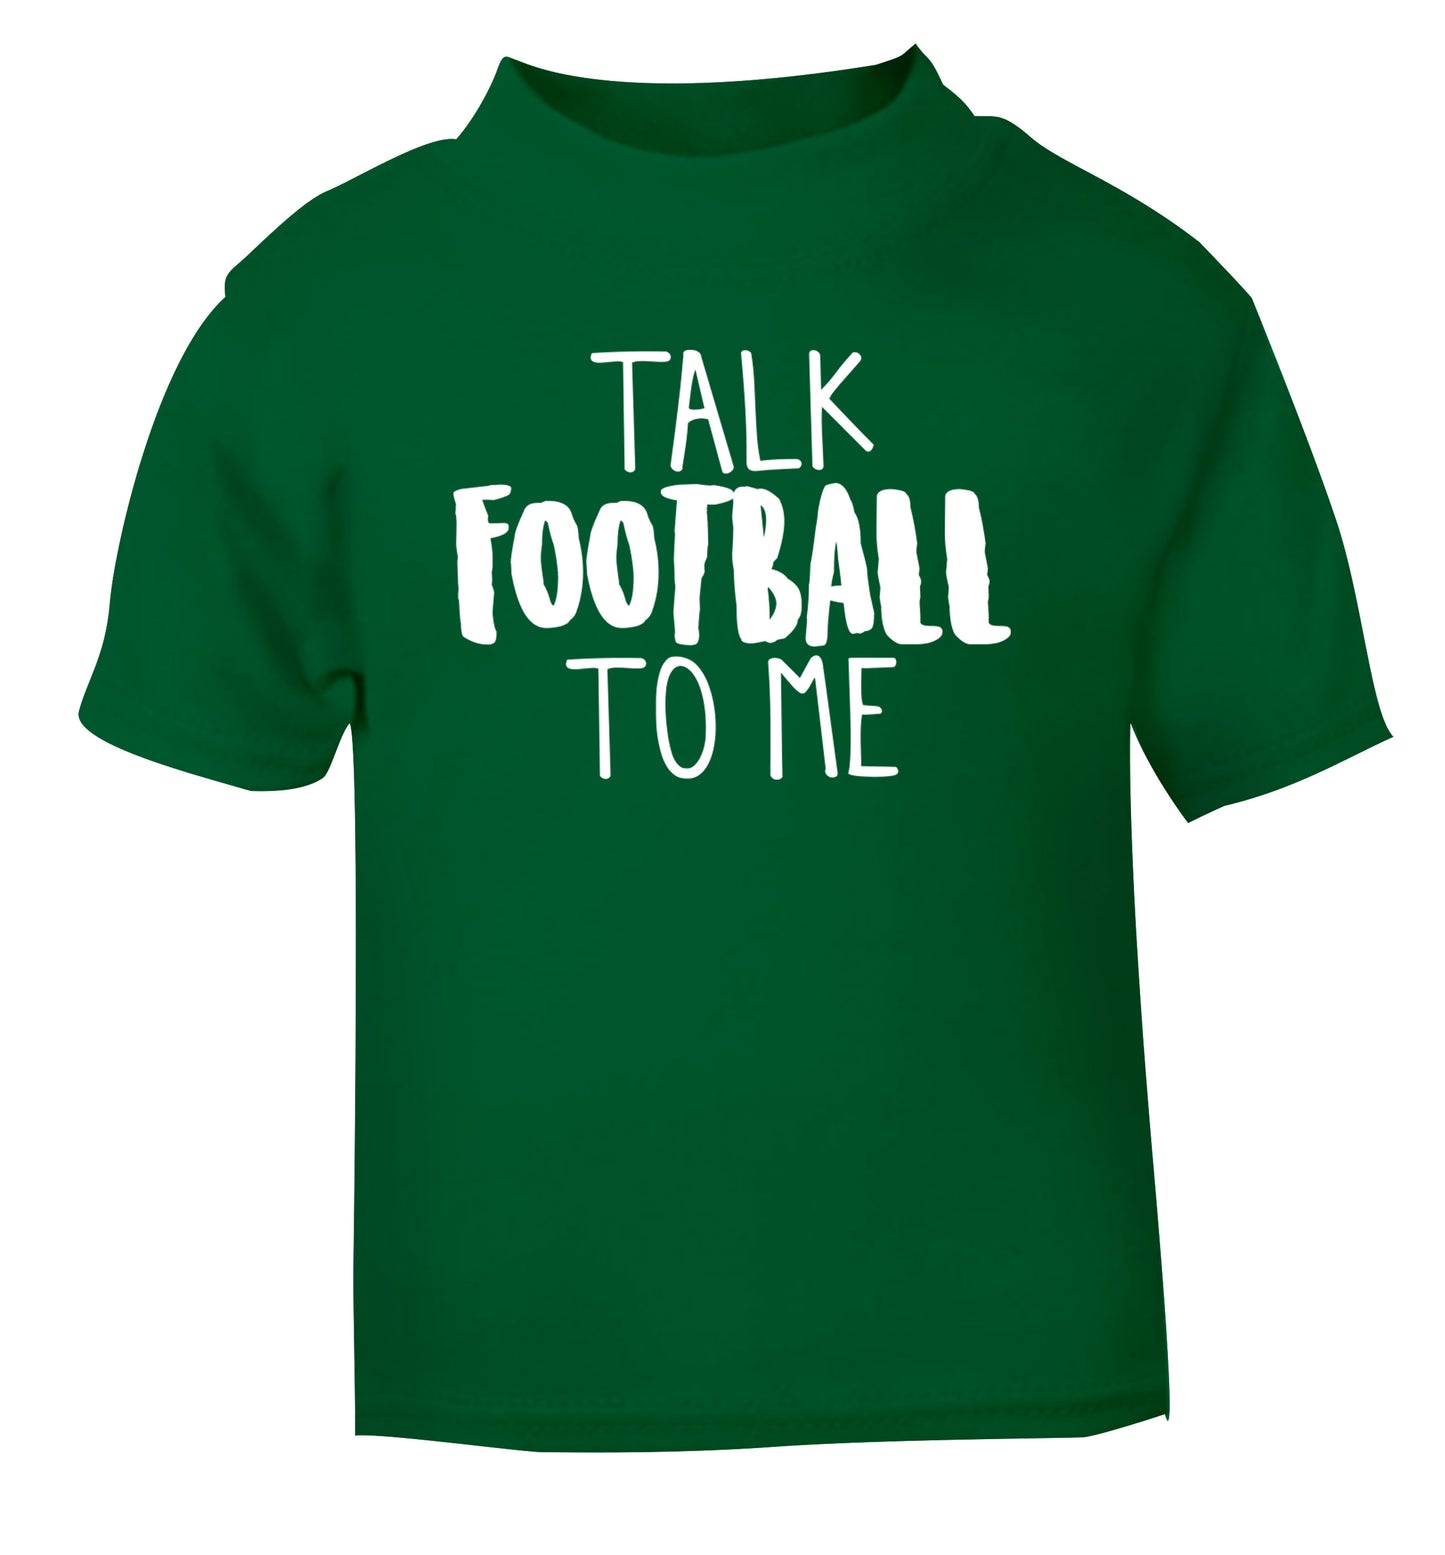 Talk football to me green Baby Toddler Tshirt 2 Years